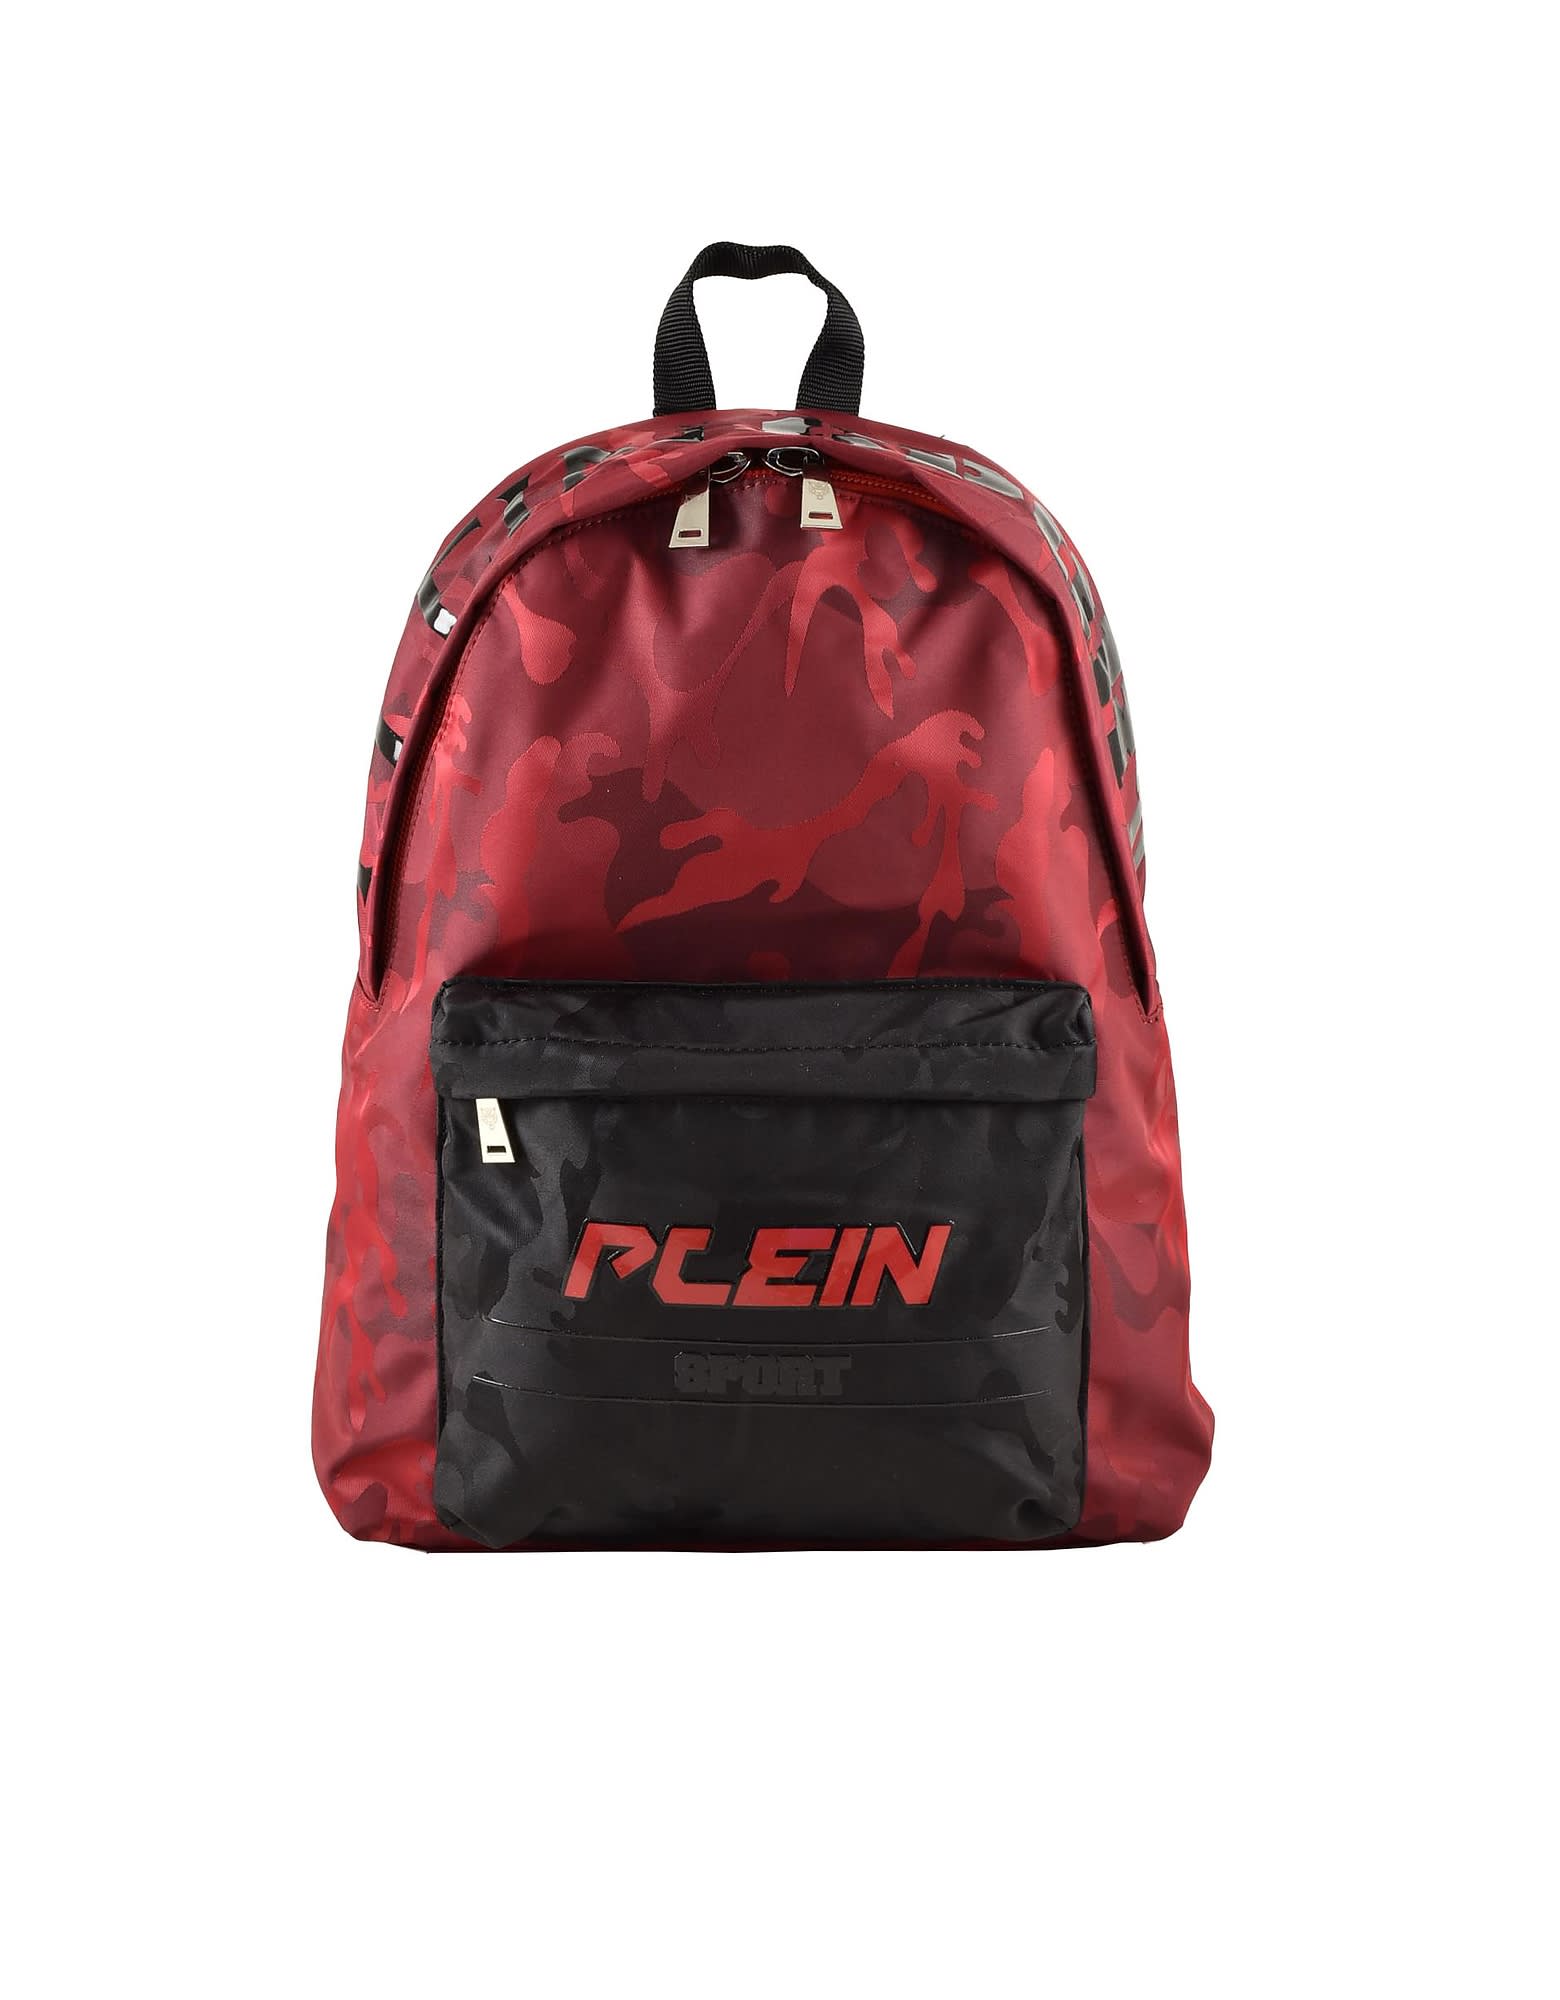 Philipp Plein Aips803 52 Red Backpack Bag for Men Save 33% Mens Backpacks Philipp Plein Backpacks 